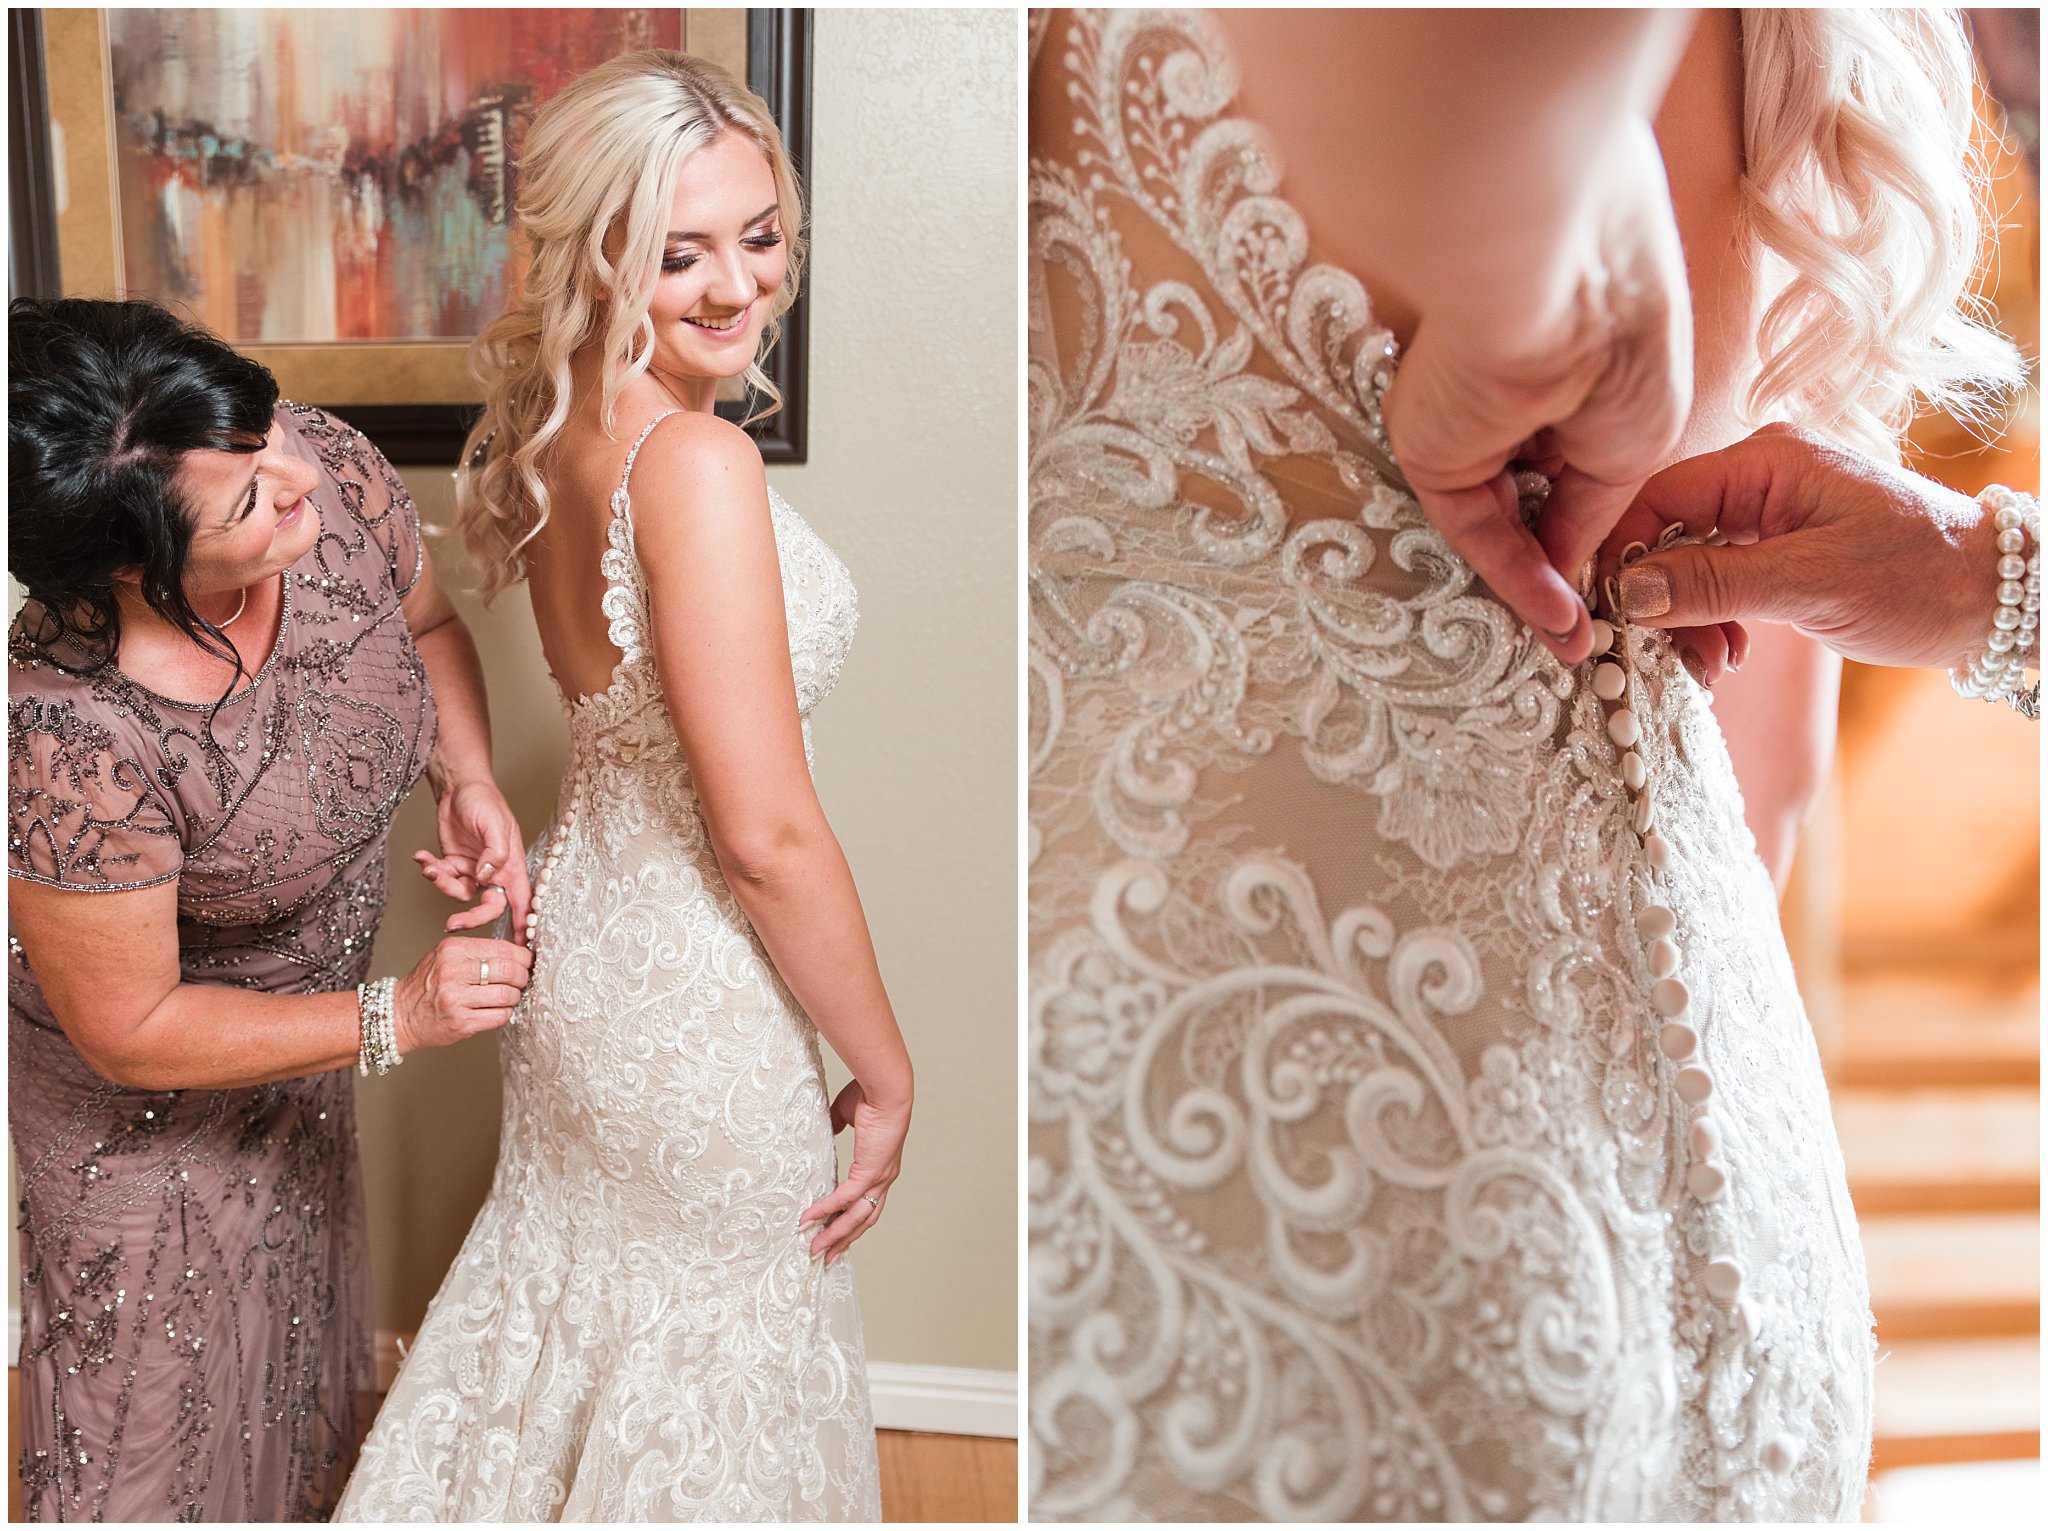 Mother of the bride buttoning up bride's dress | Dusty Blue and Rose Summer Wedding at Oak Hills Utah | Jessie and Dallin Photography